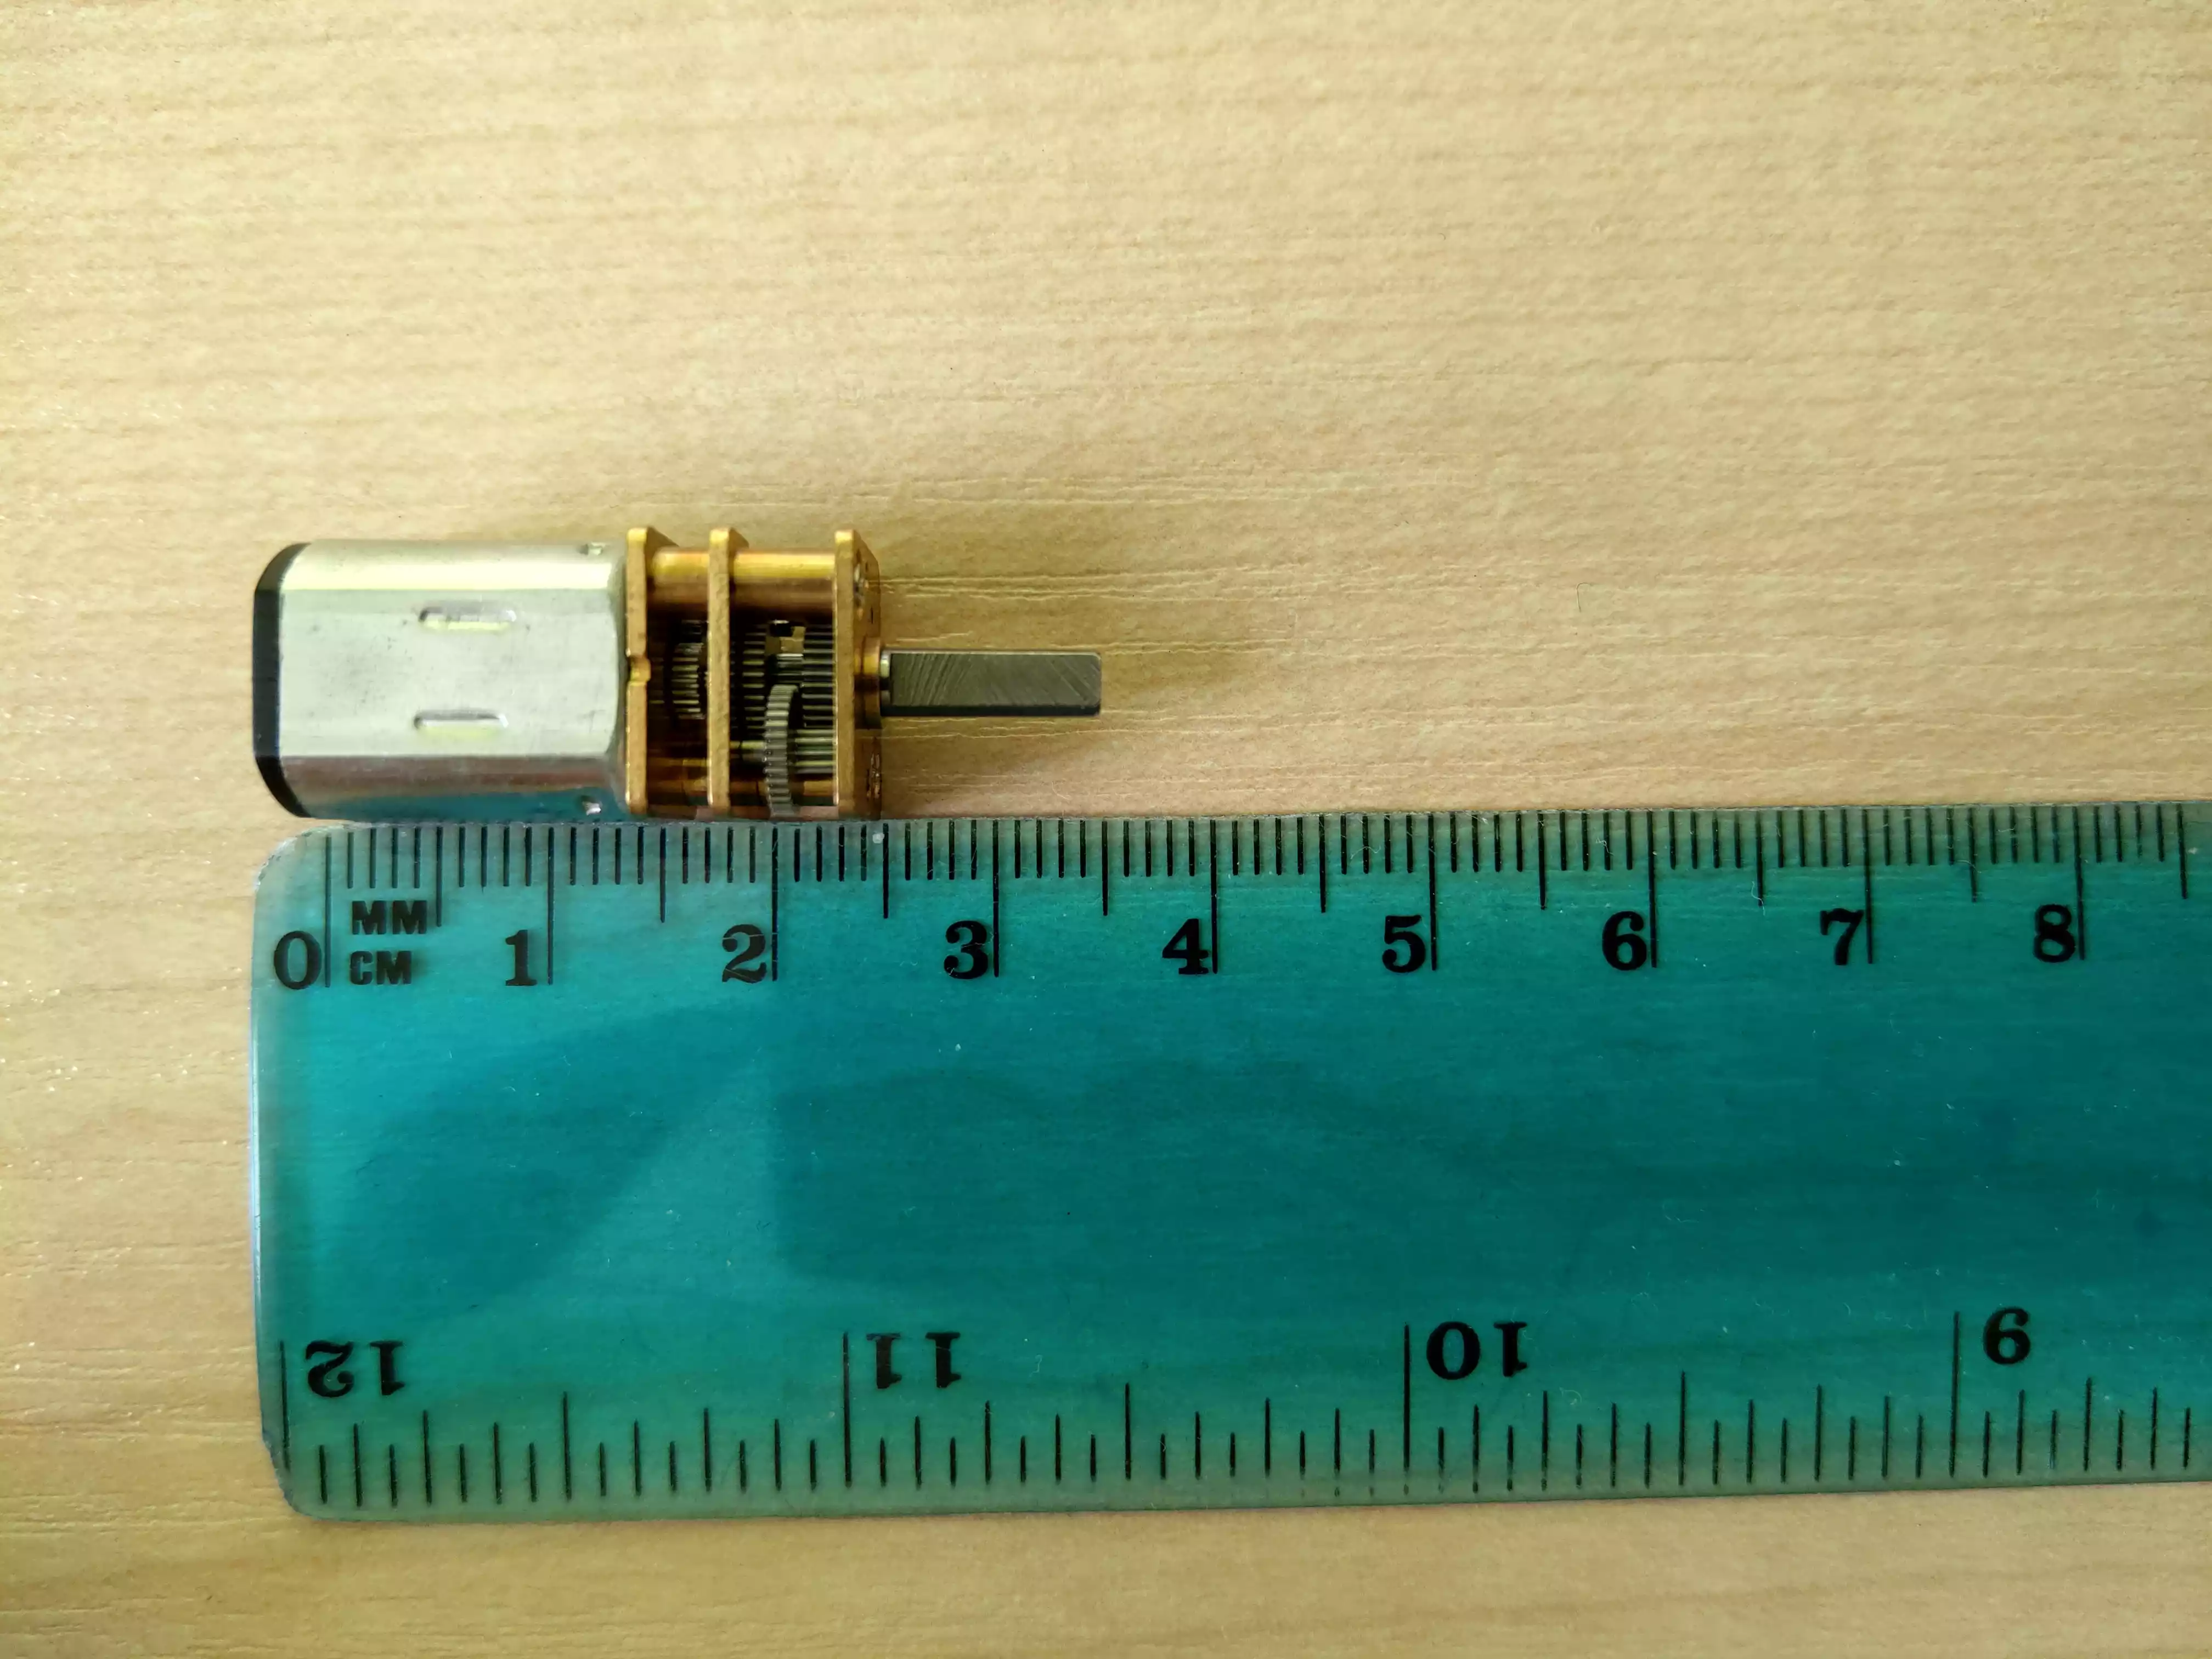 Measurement of one DC motor by a ruler